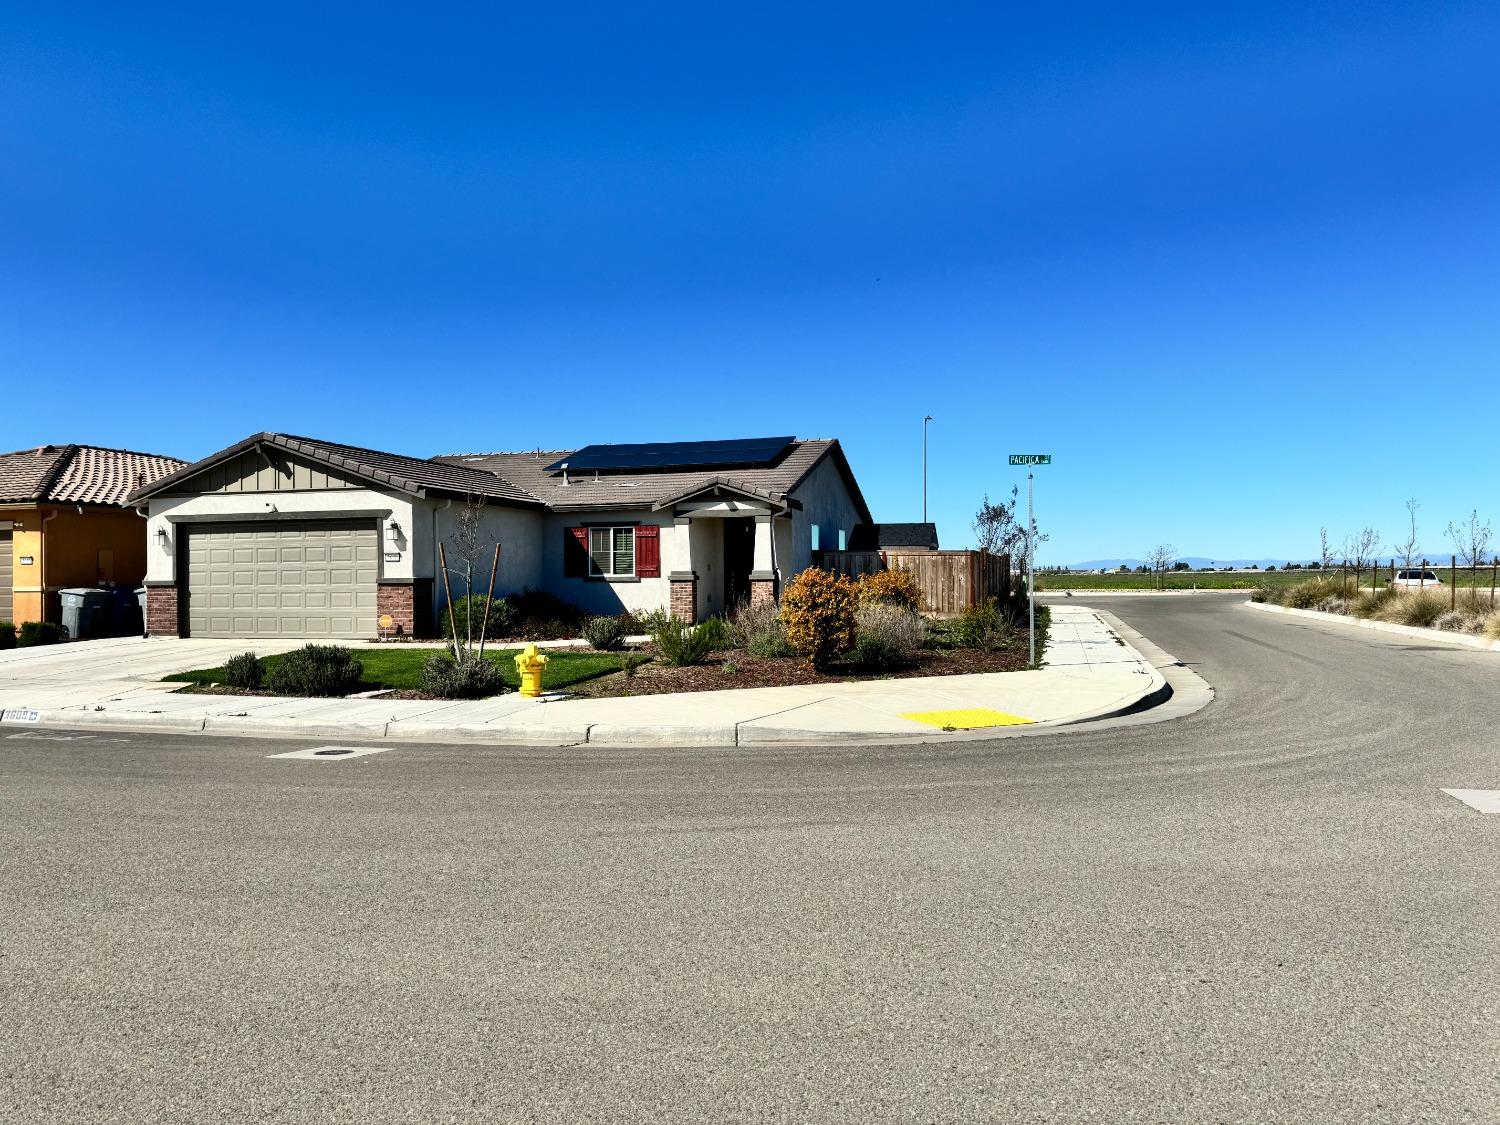 Photo of 3609 Pacifica Dr in Madera, CA